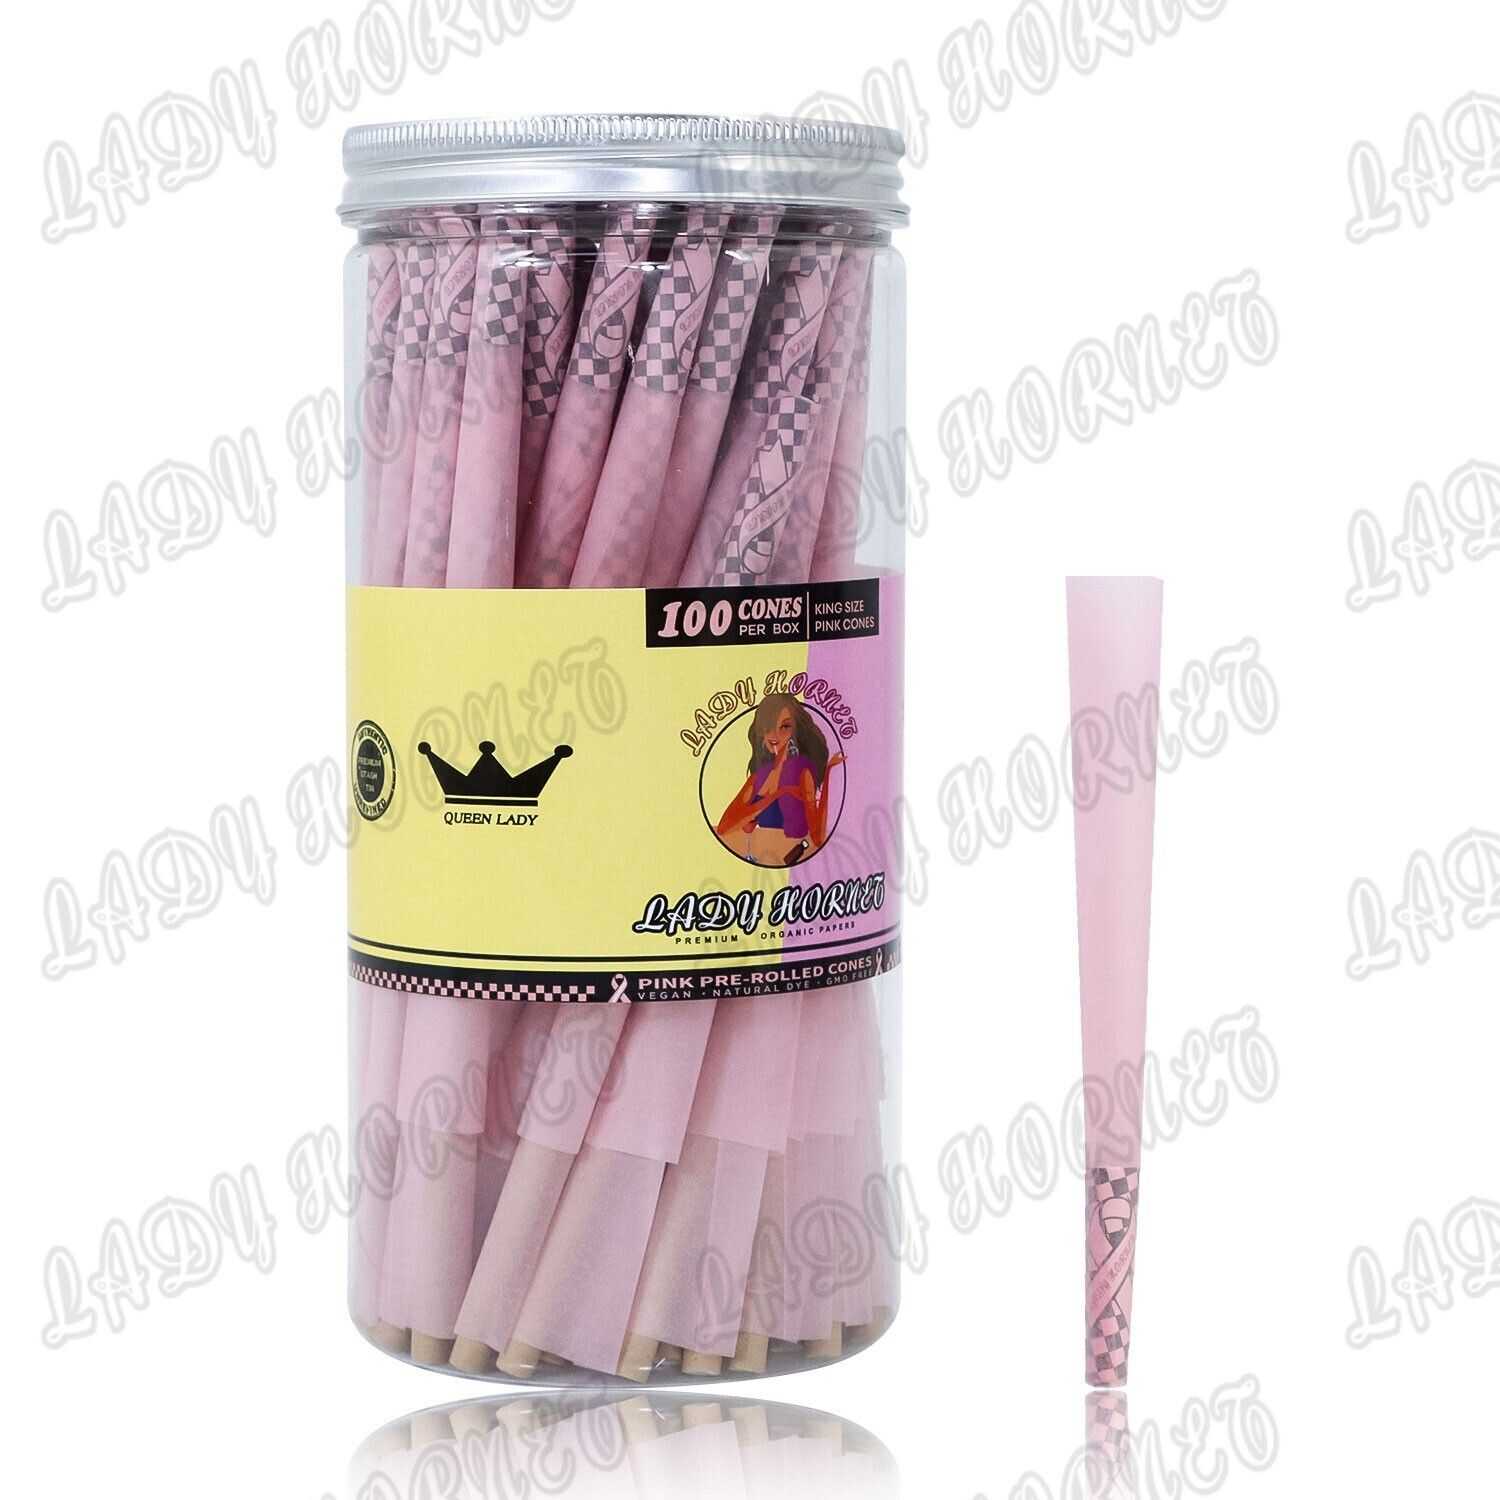 Pink Hornet Cones Classic King Size 100 Cones- Pre Rolled Cones with Filter Tips